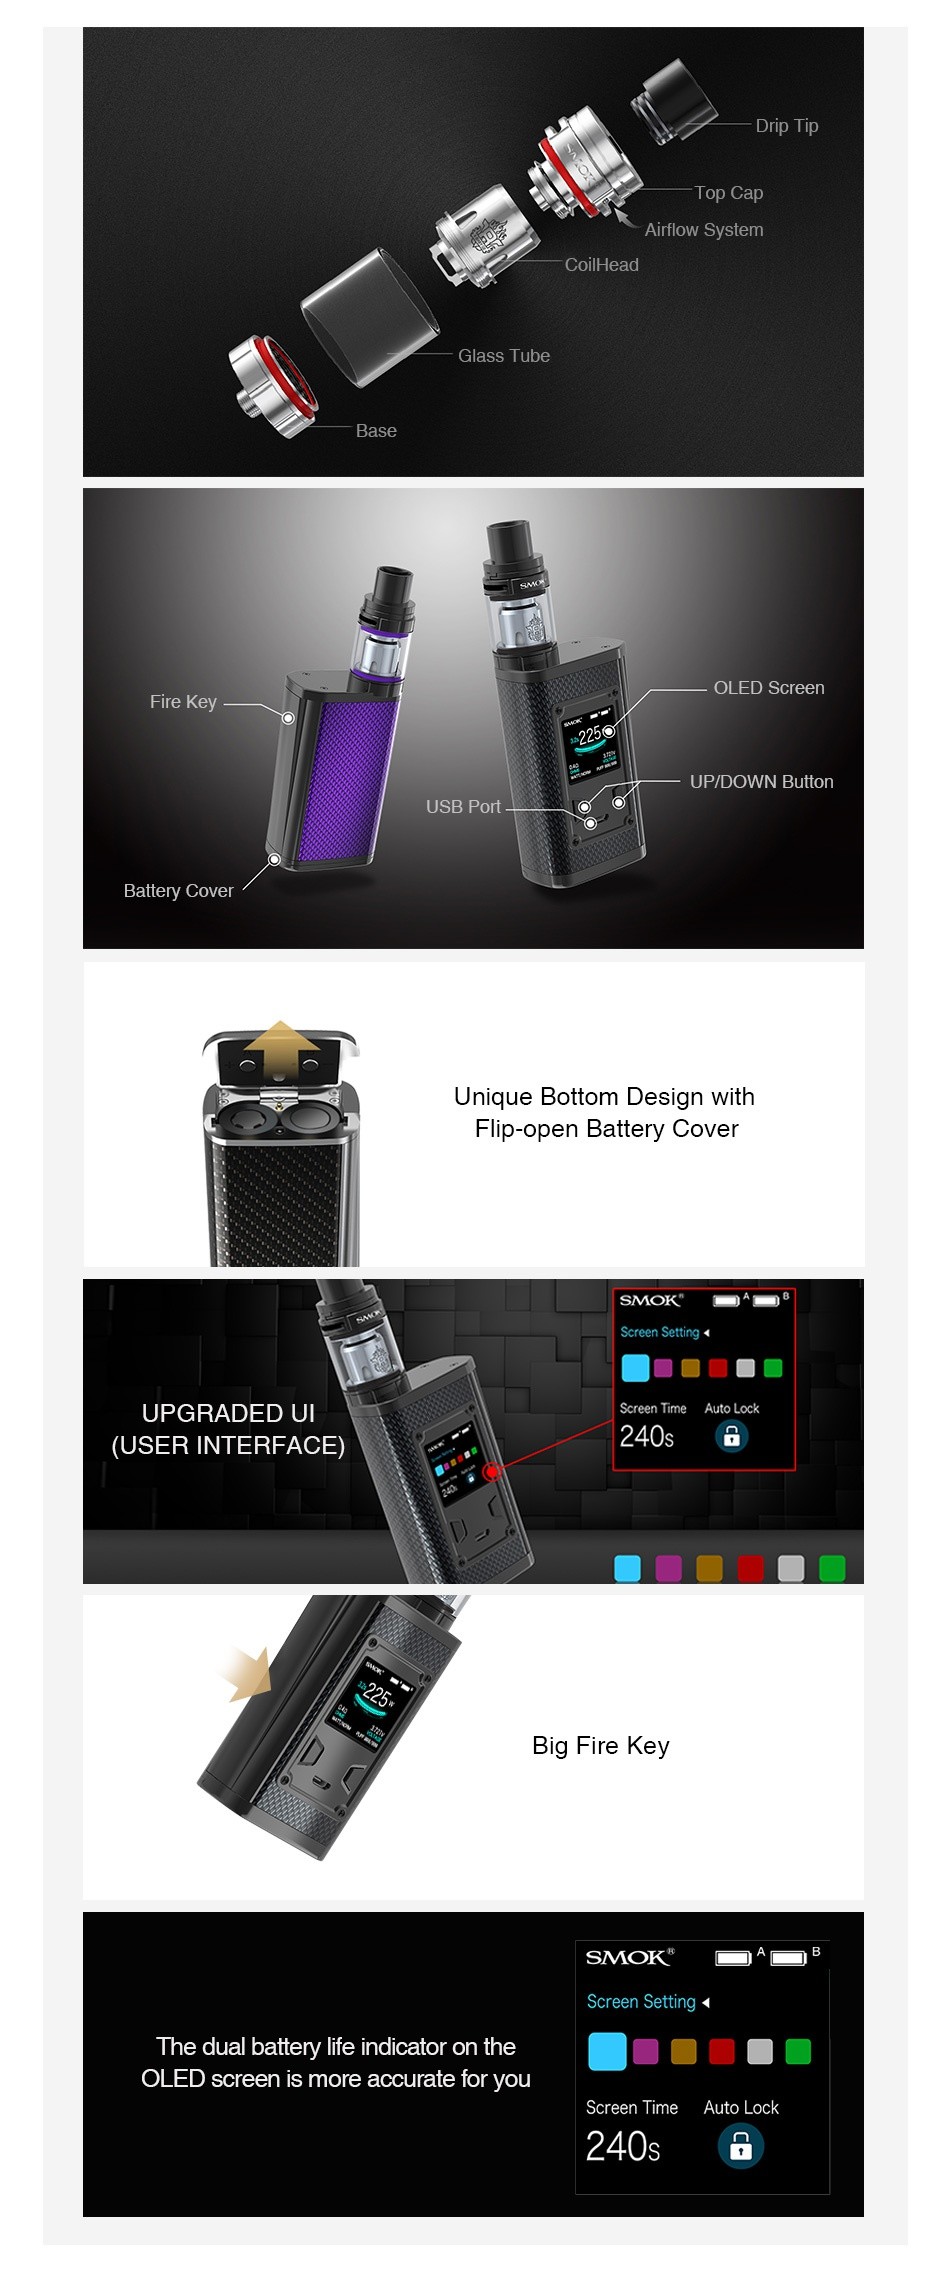 SMOK Majesty 225W TC Kit with TFV8 X-Baby rip T ip Top Cap Airflow System Base OLED Scr UP DOWN Button Battery covel Unique bottom Design with Flip open Battery Cover SMOK        UPGRADED UI Screen Time Auto Lock  USER INTERFACE  Big Fire Key Screen Setting 4 The dual battery life indicator on the OLED screen is more accurate for you Screen Time Auto Lock 240s